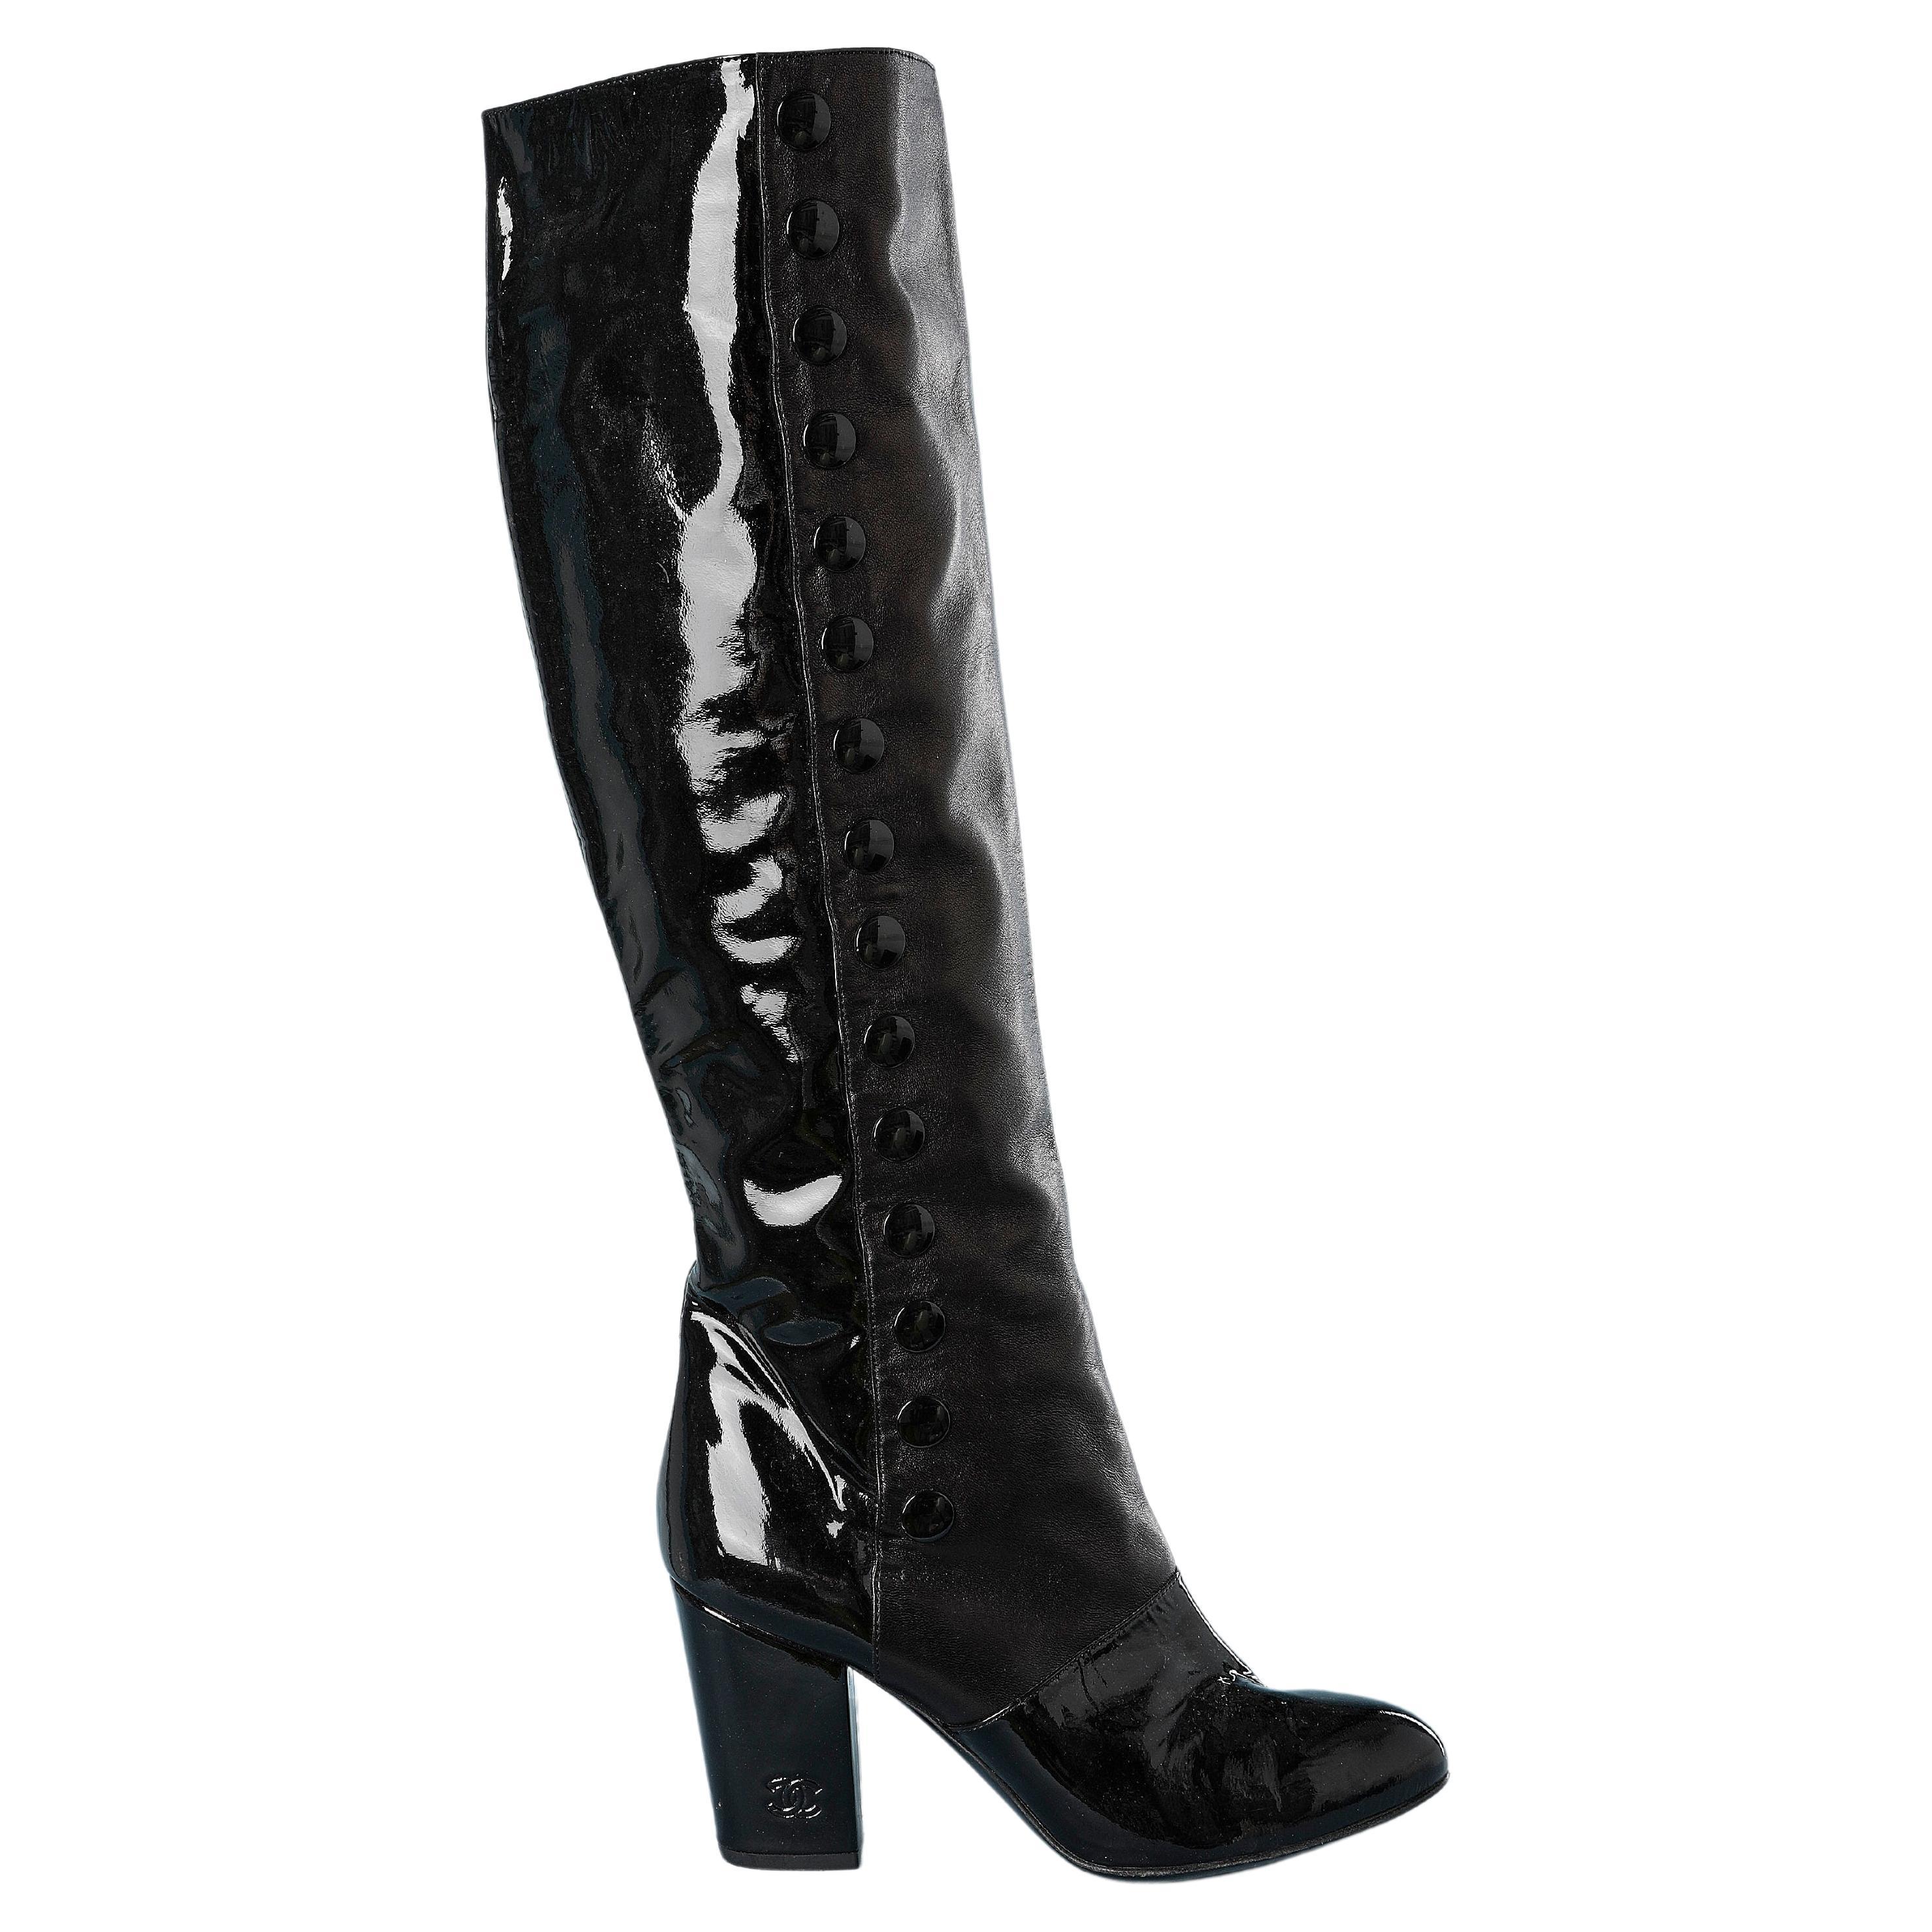 Black Patent Leather and Black Leather Boots with Snap on The Side Chanel